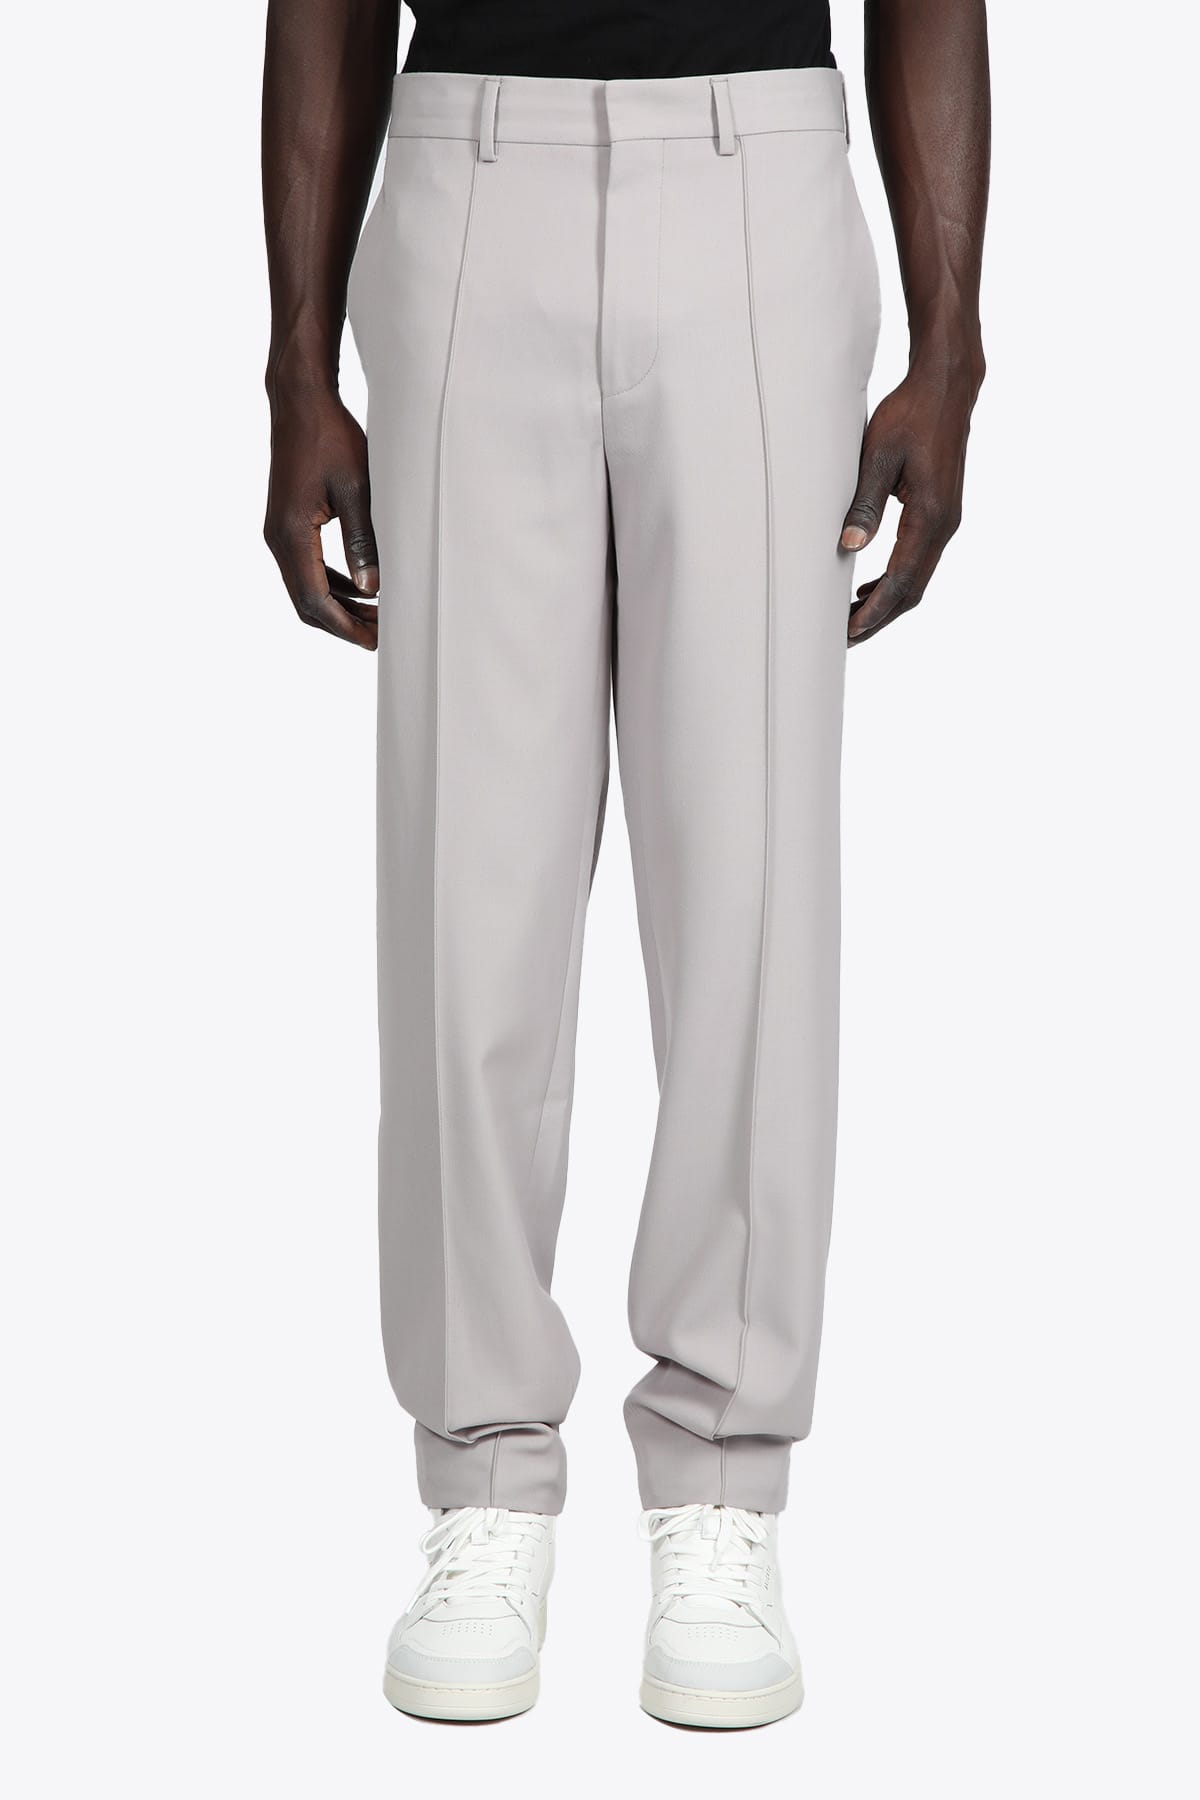 Axel Arigato Supper Straight Wool Trousers Pearl grey wool tailored pant - Supper Straight Wool Trousers